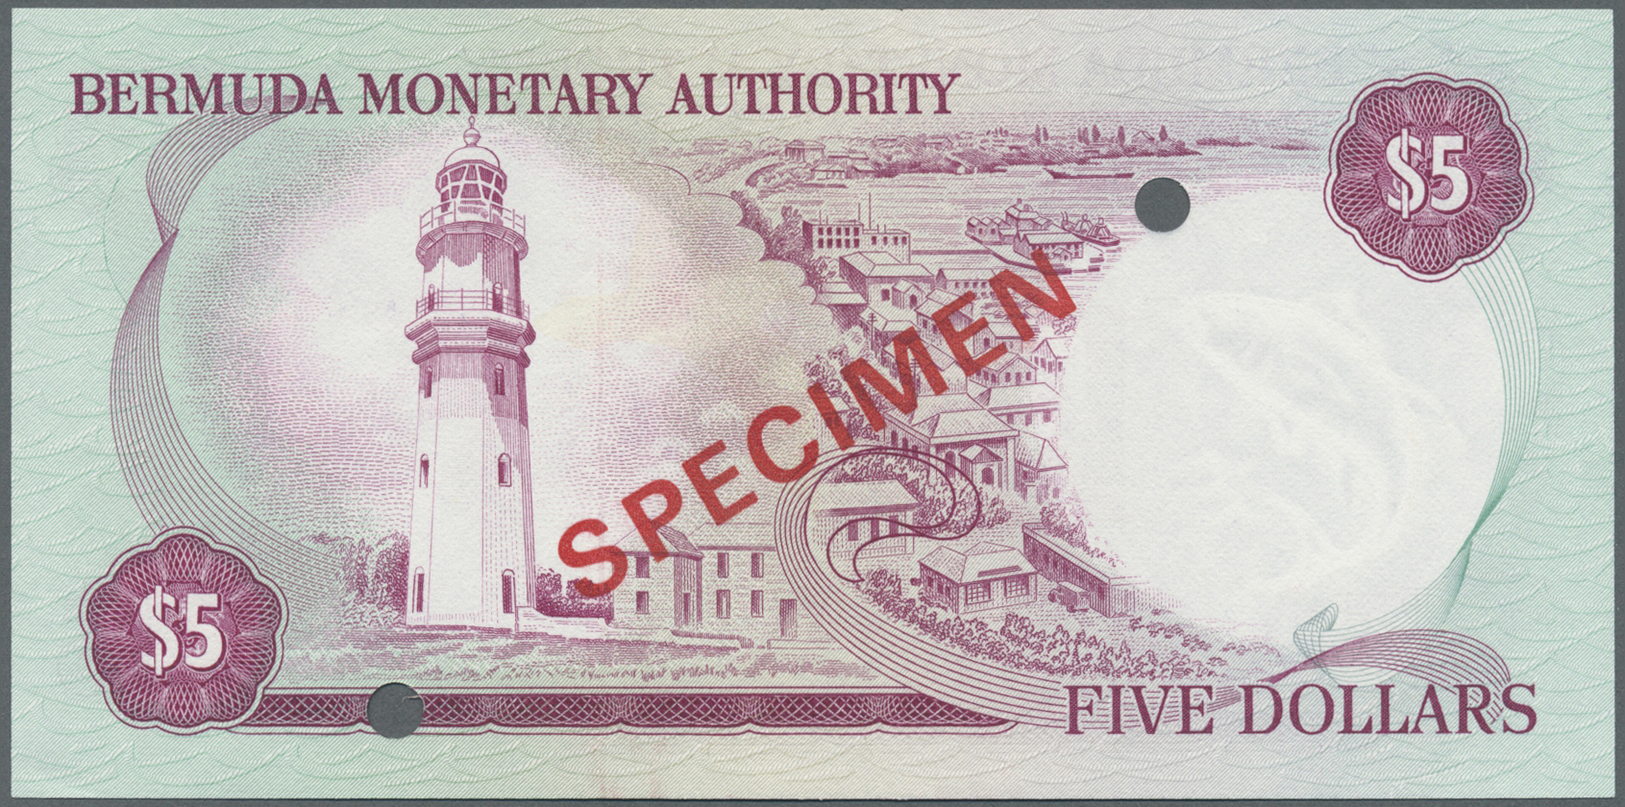 00313 Bermuda: set of 6 notes from 1 to 100 Dollars 1985 SPECIMEN P. CS1, in condition: UNC. (6 pcs)